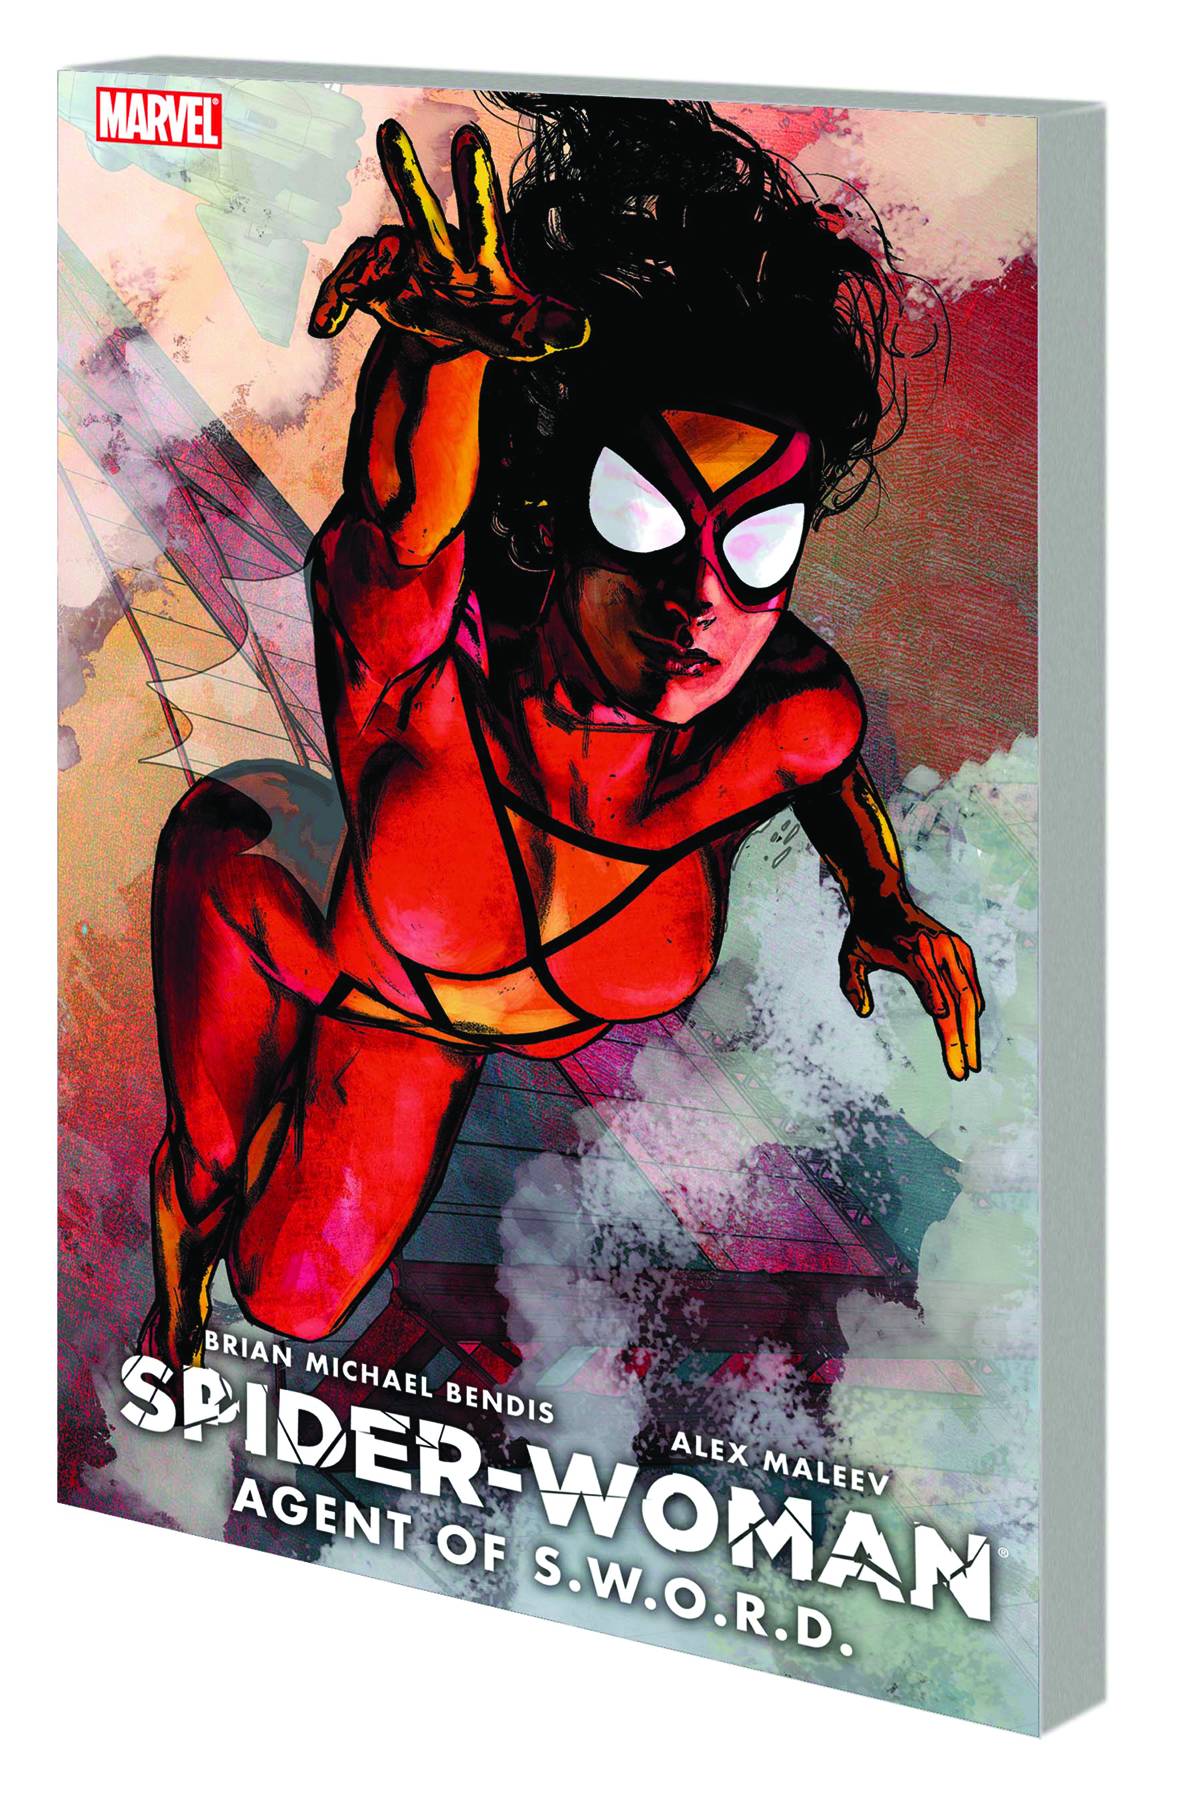 Spider-Woman Volume 1 Agent of S.w.o.r.d. Graphic Novel